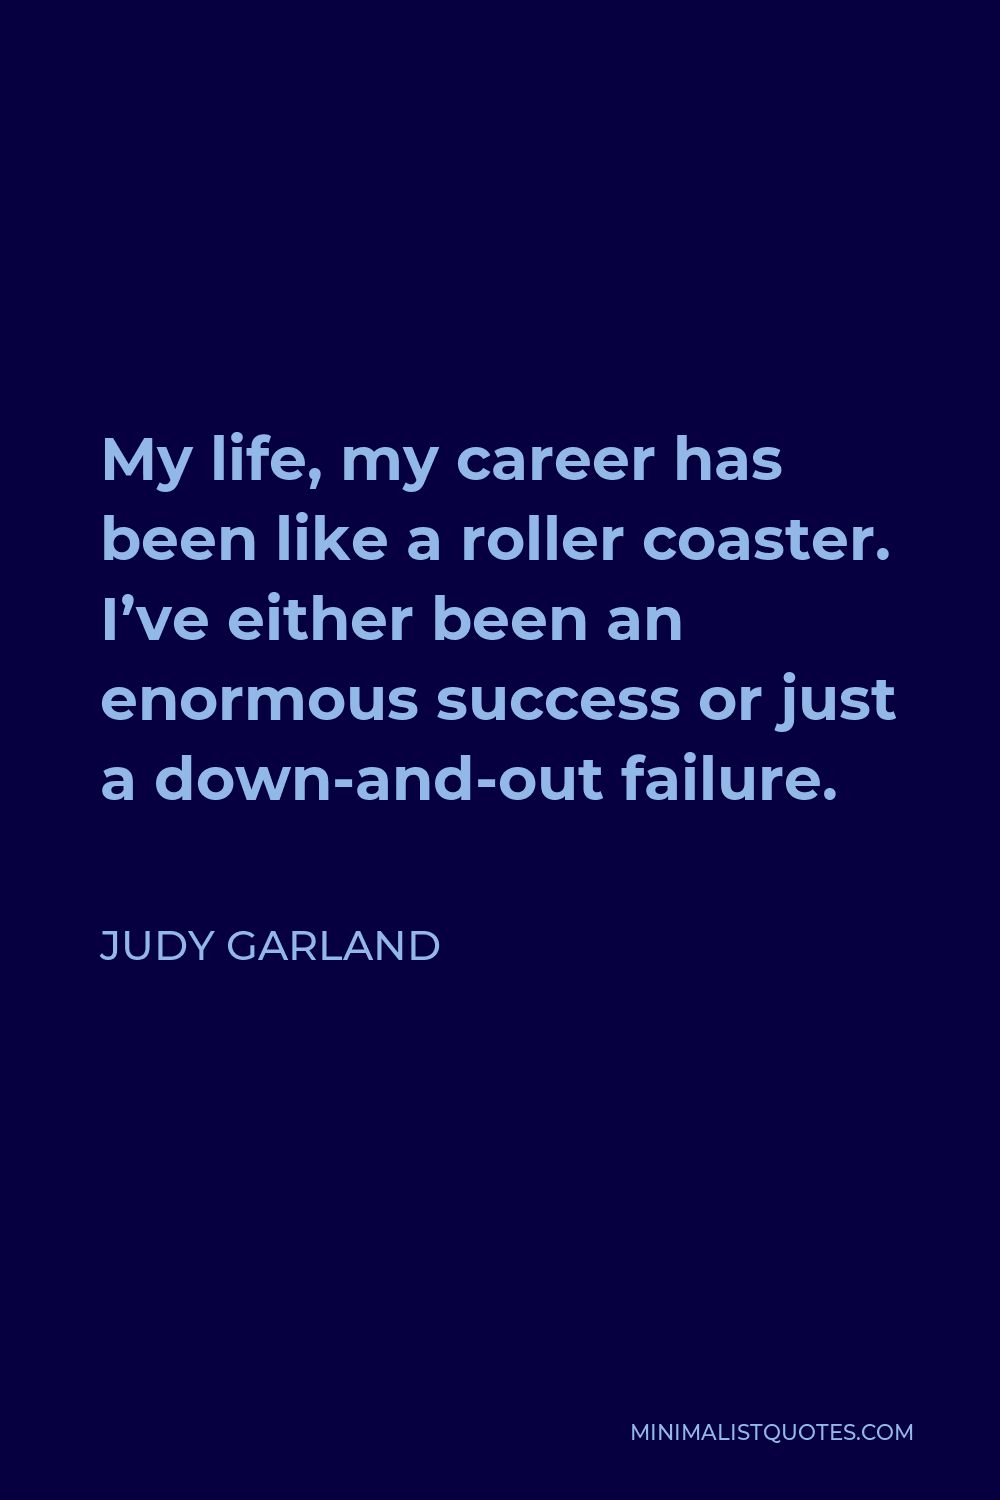 Judy Garland Quote - My life, my career has been like a roller coaster. I’ve either been an enormous success or just a down-and-out failure.